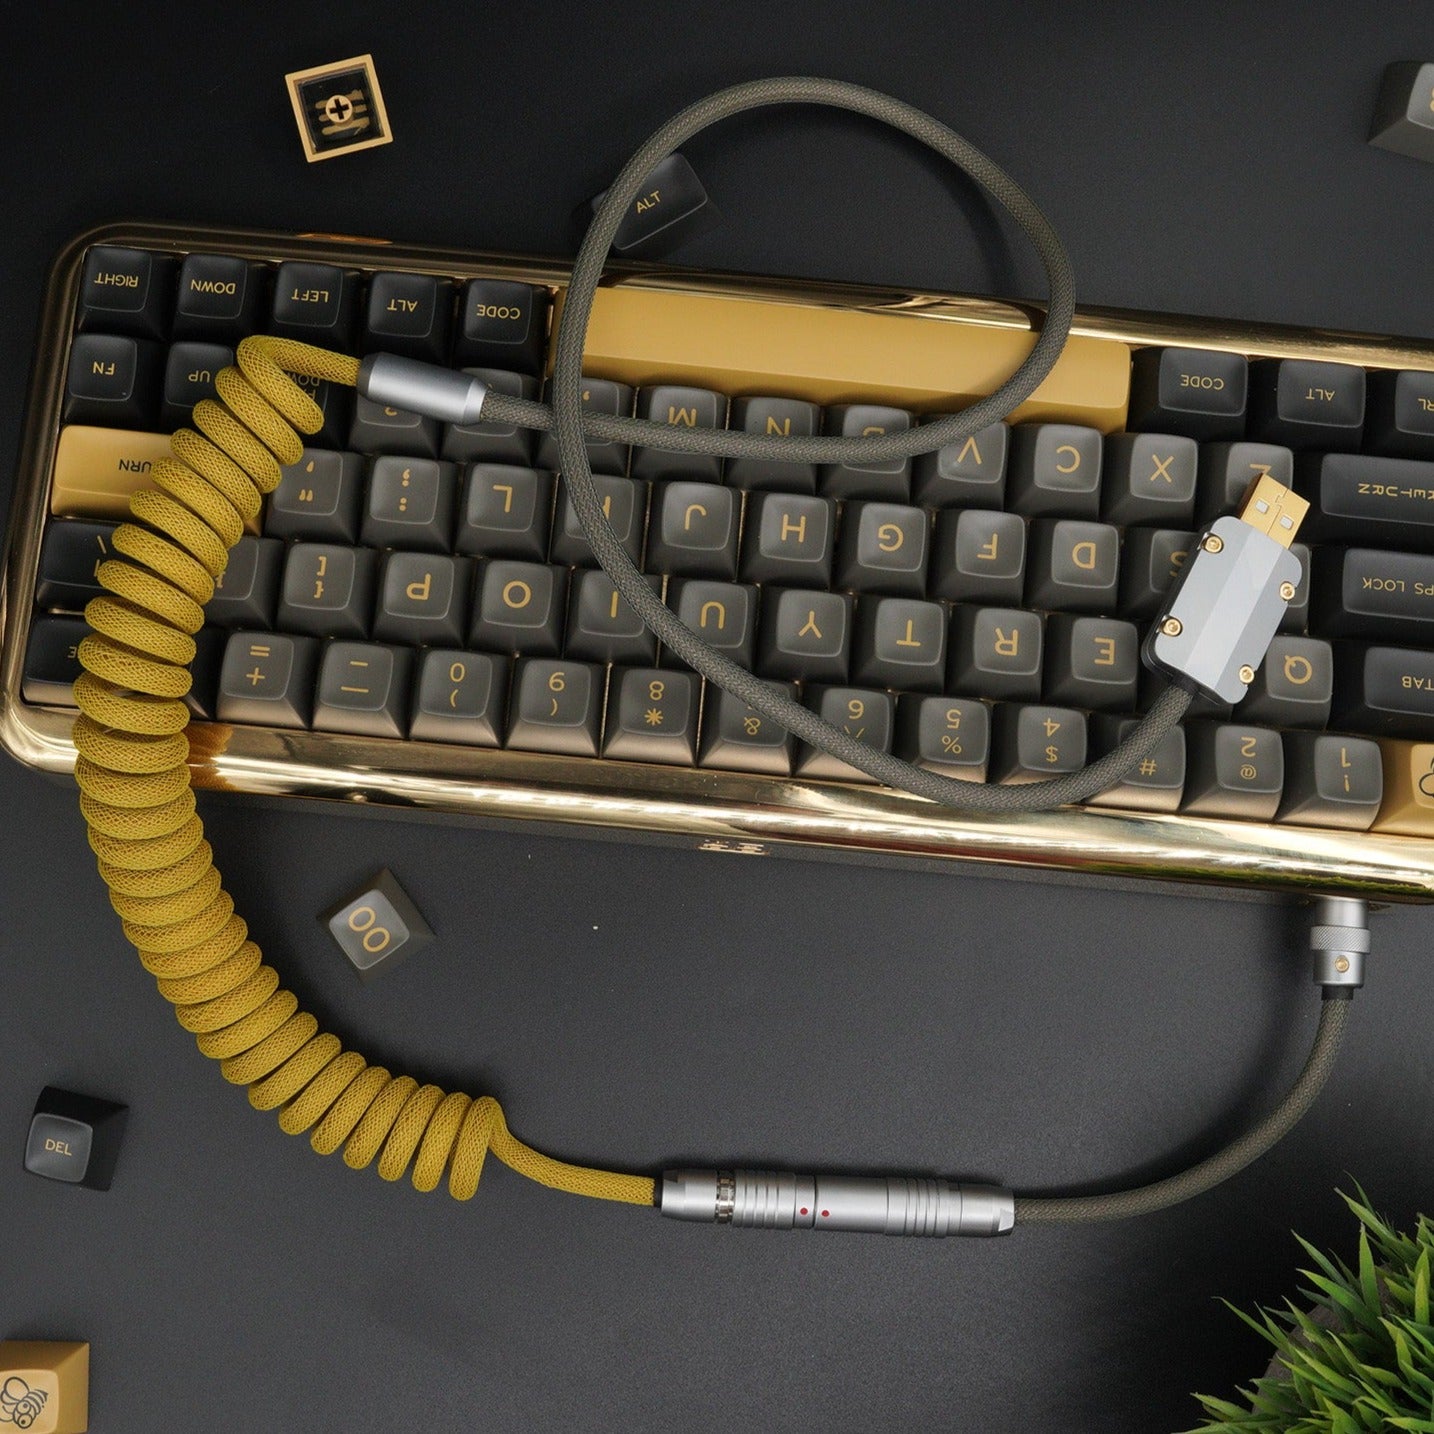 Sleeved Coiled Keyboard Aviator Cable, Lemo Style Connector - Gold/Earth